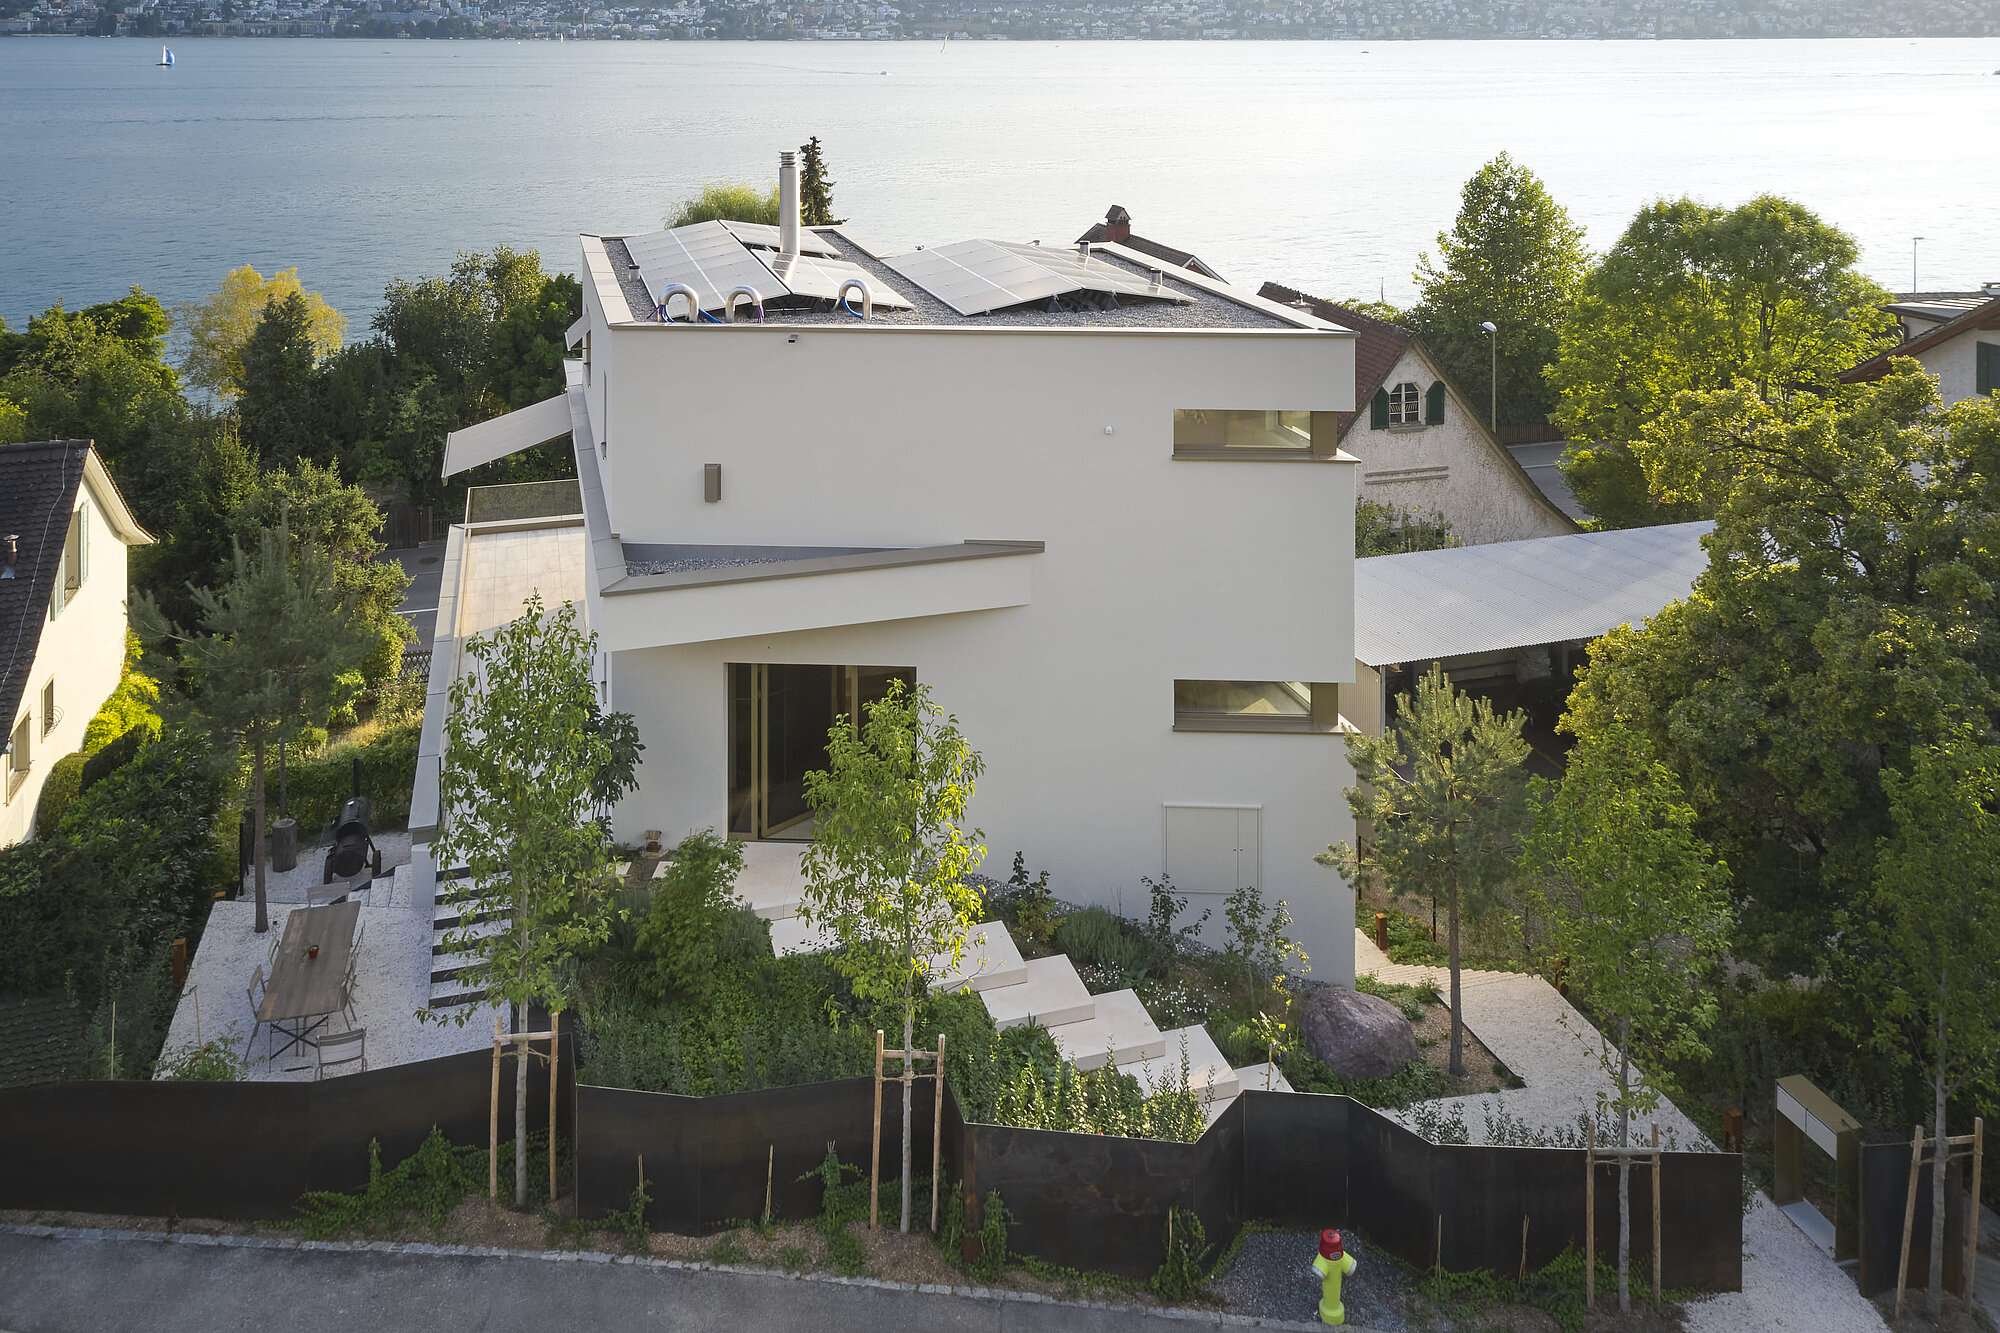 Exterior view of the VILLA HECHT detached house, lake view